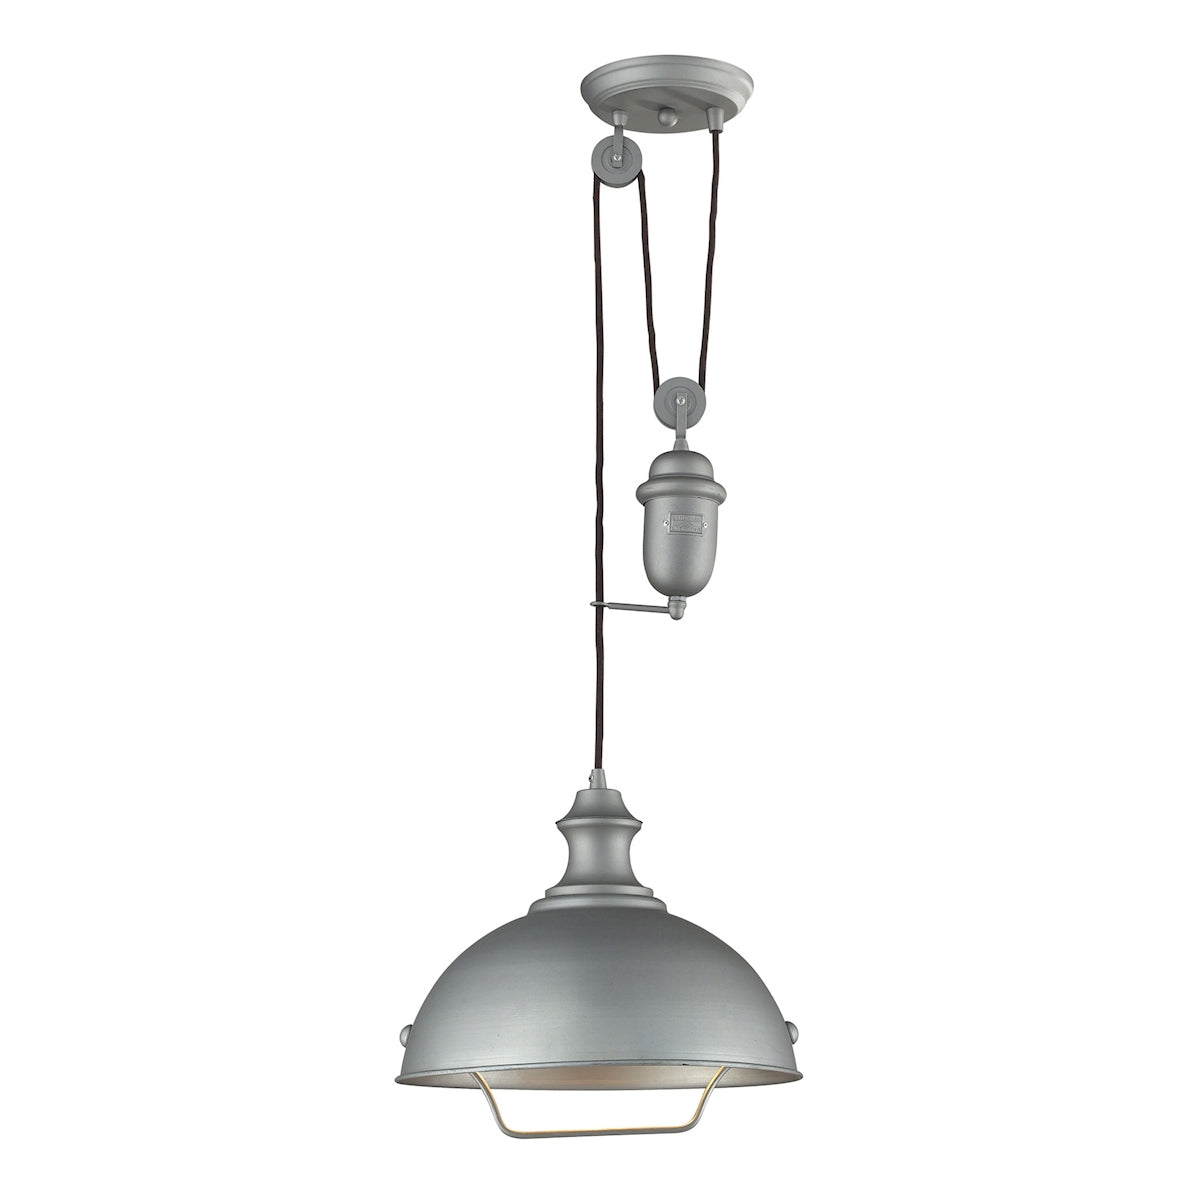 ELK Lighting 65081-1 Farmhouse 1-Light Adjustable Pendant in Aged Pewter with Matching Shade